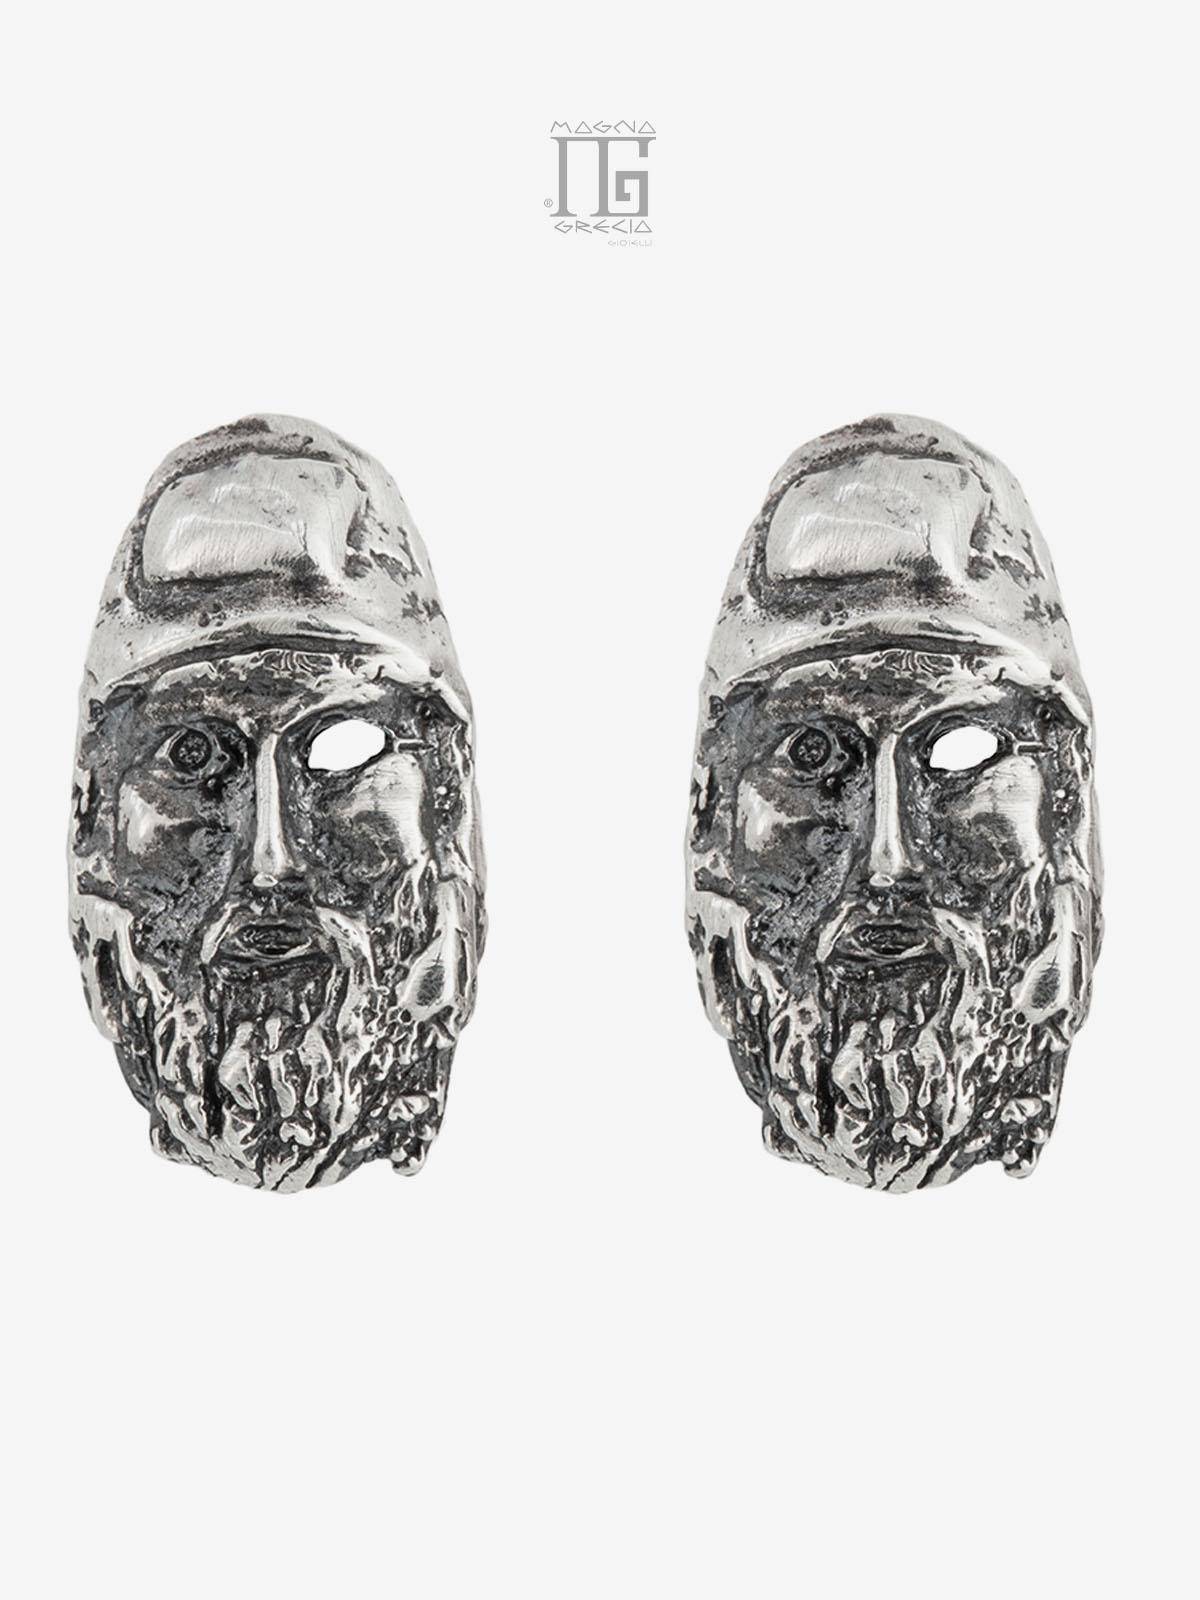 Silver earrings depicting the face of the Riace Bronze B Cod. MGK 3838 V